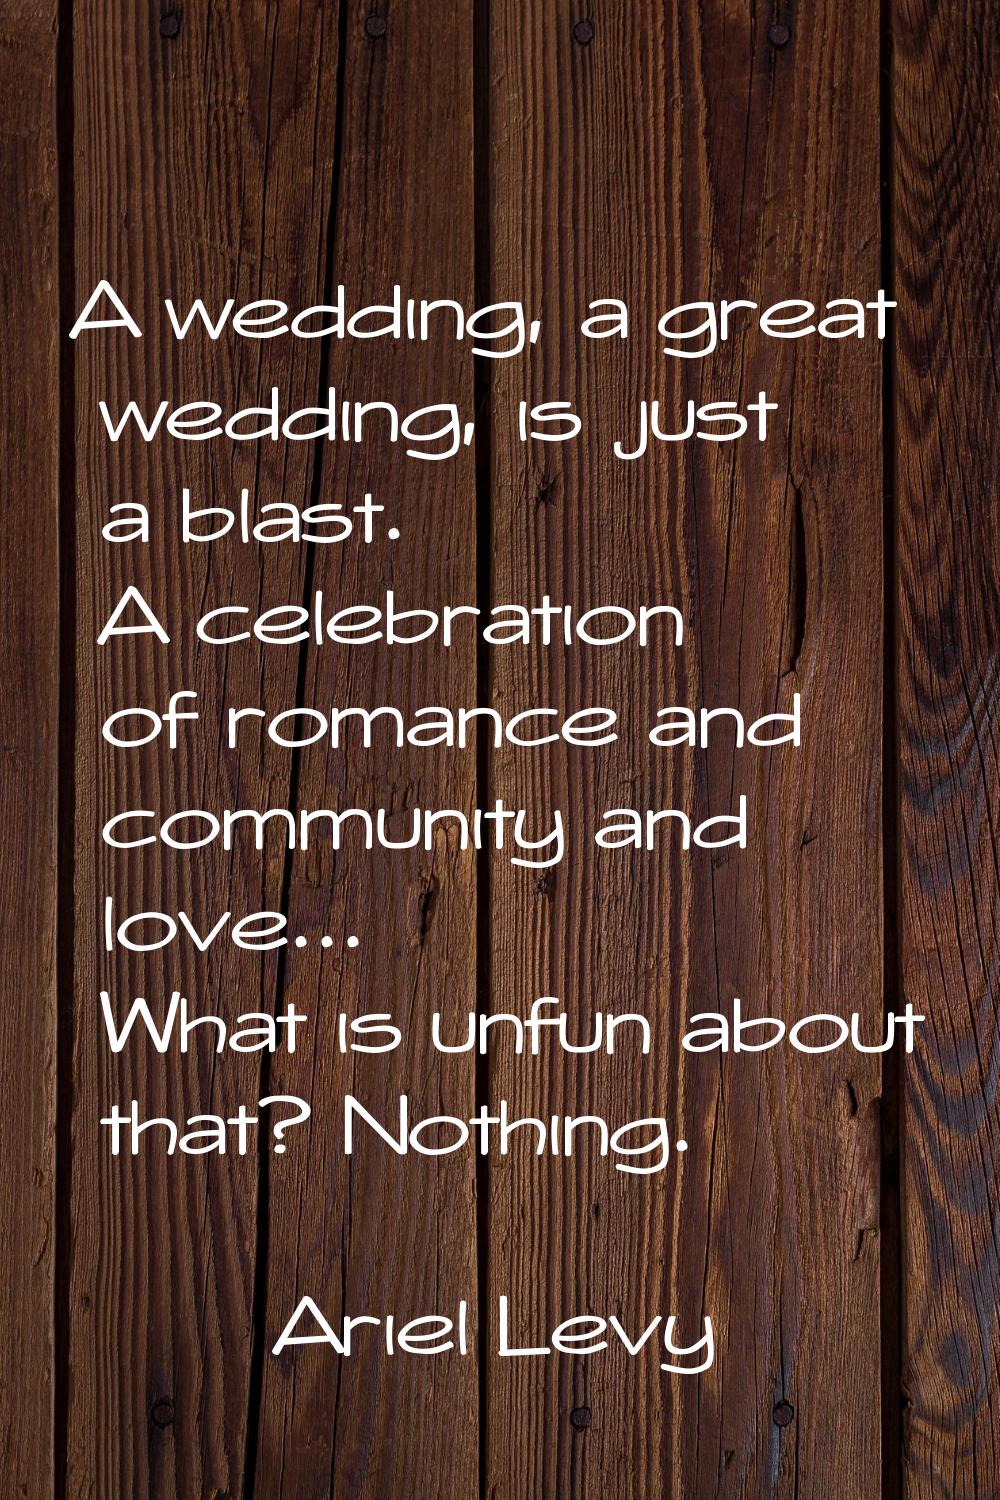 A wedding, a great wedding, is just a blast. A celebration of romance and community and love... Wha